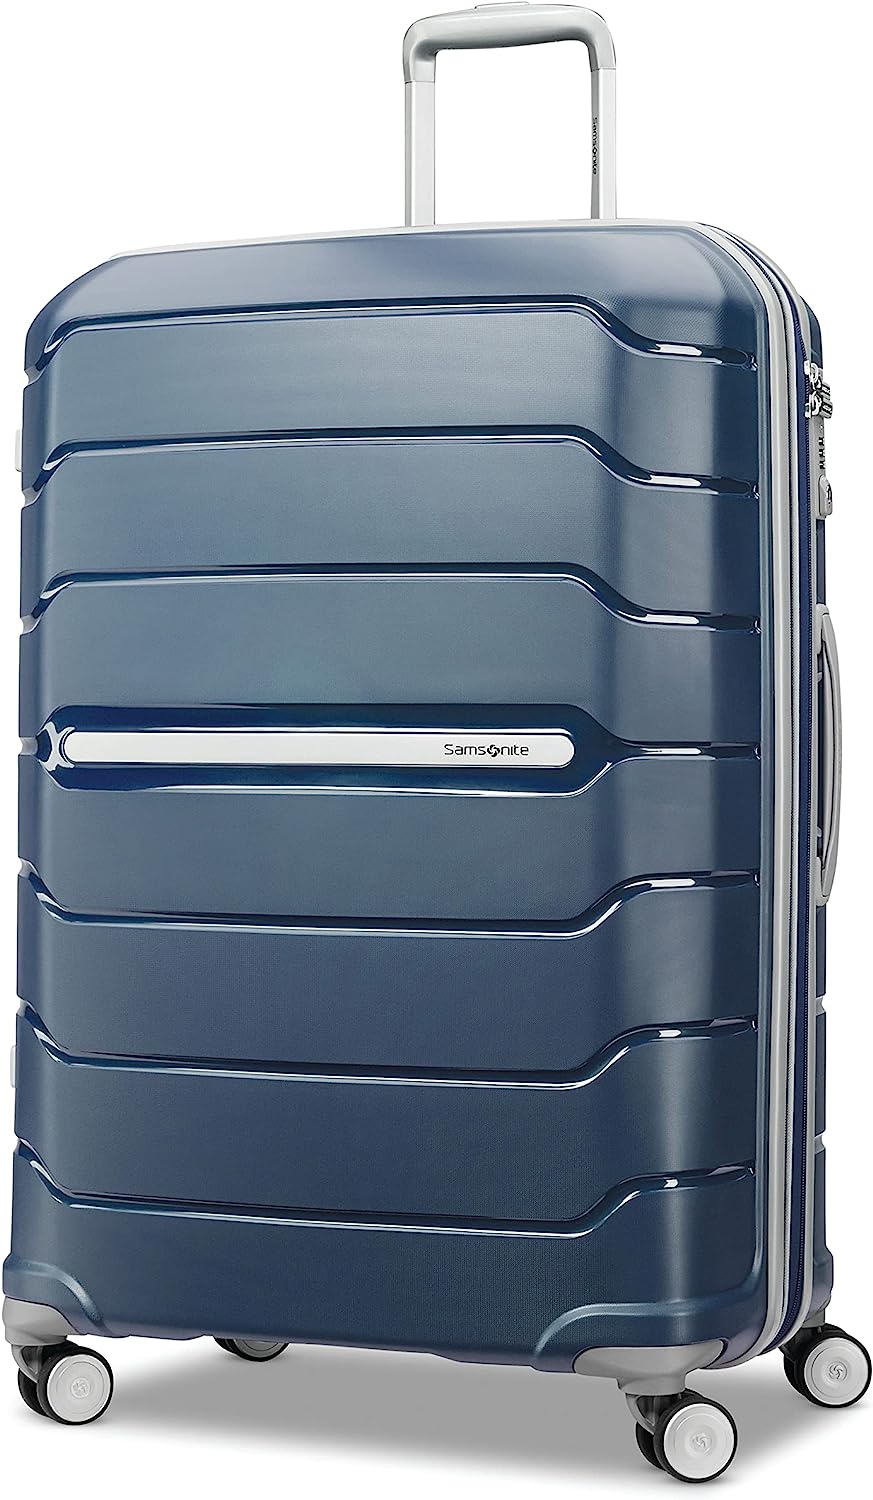 Samsonite Freeform Hardside Expandable with Double Spinner Wheels, Checked-Large 28-Inch, Navy 